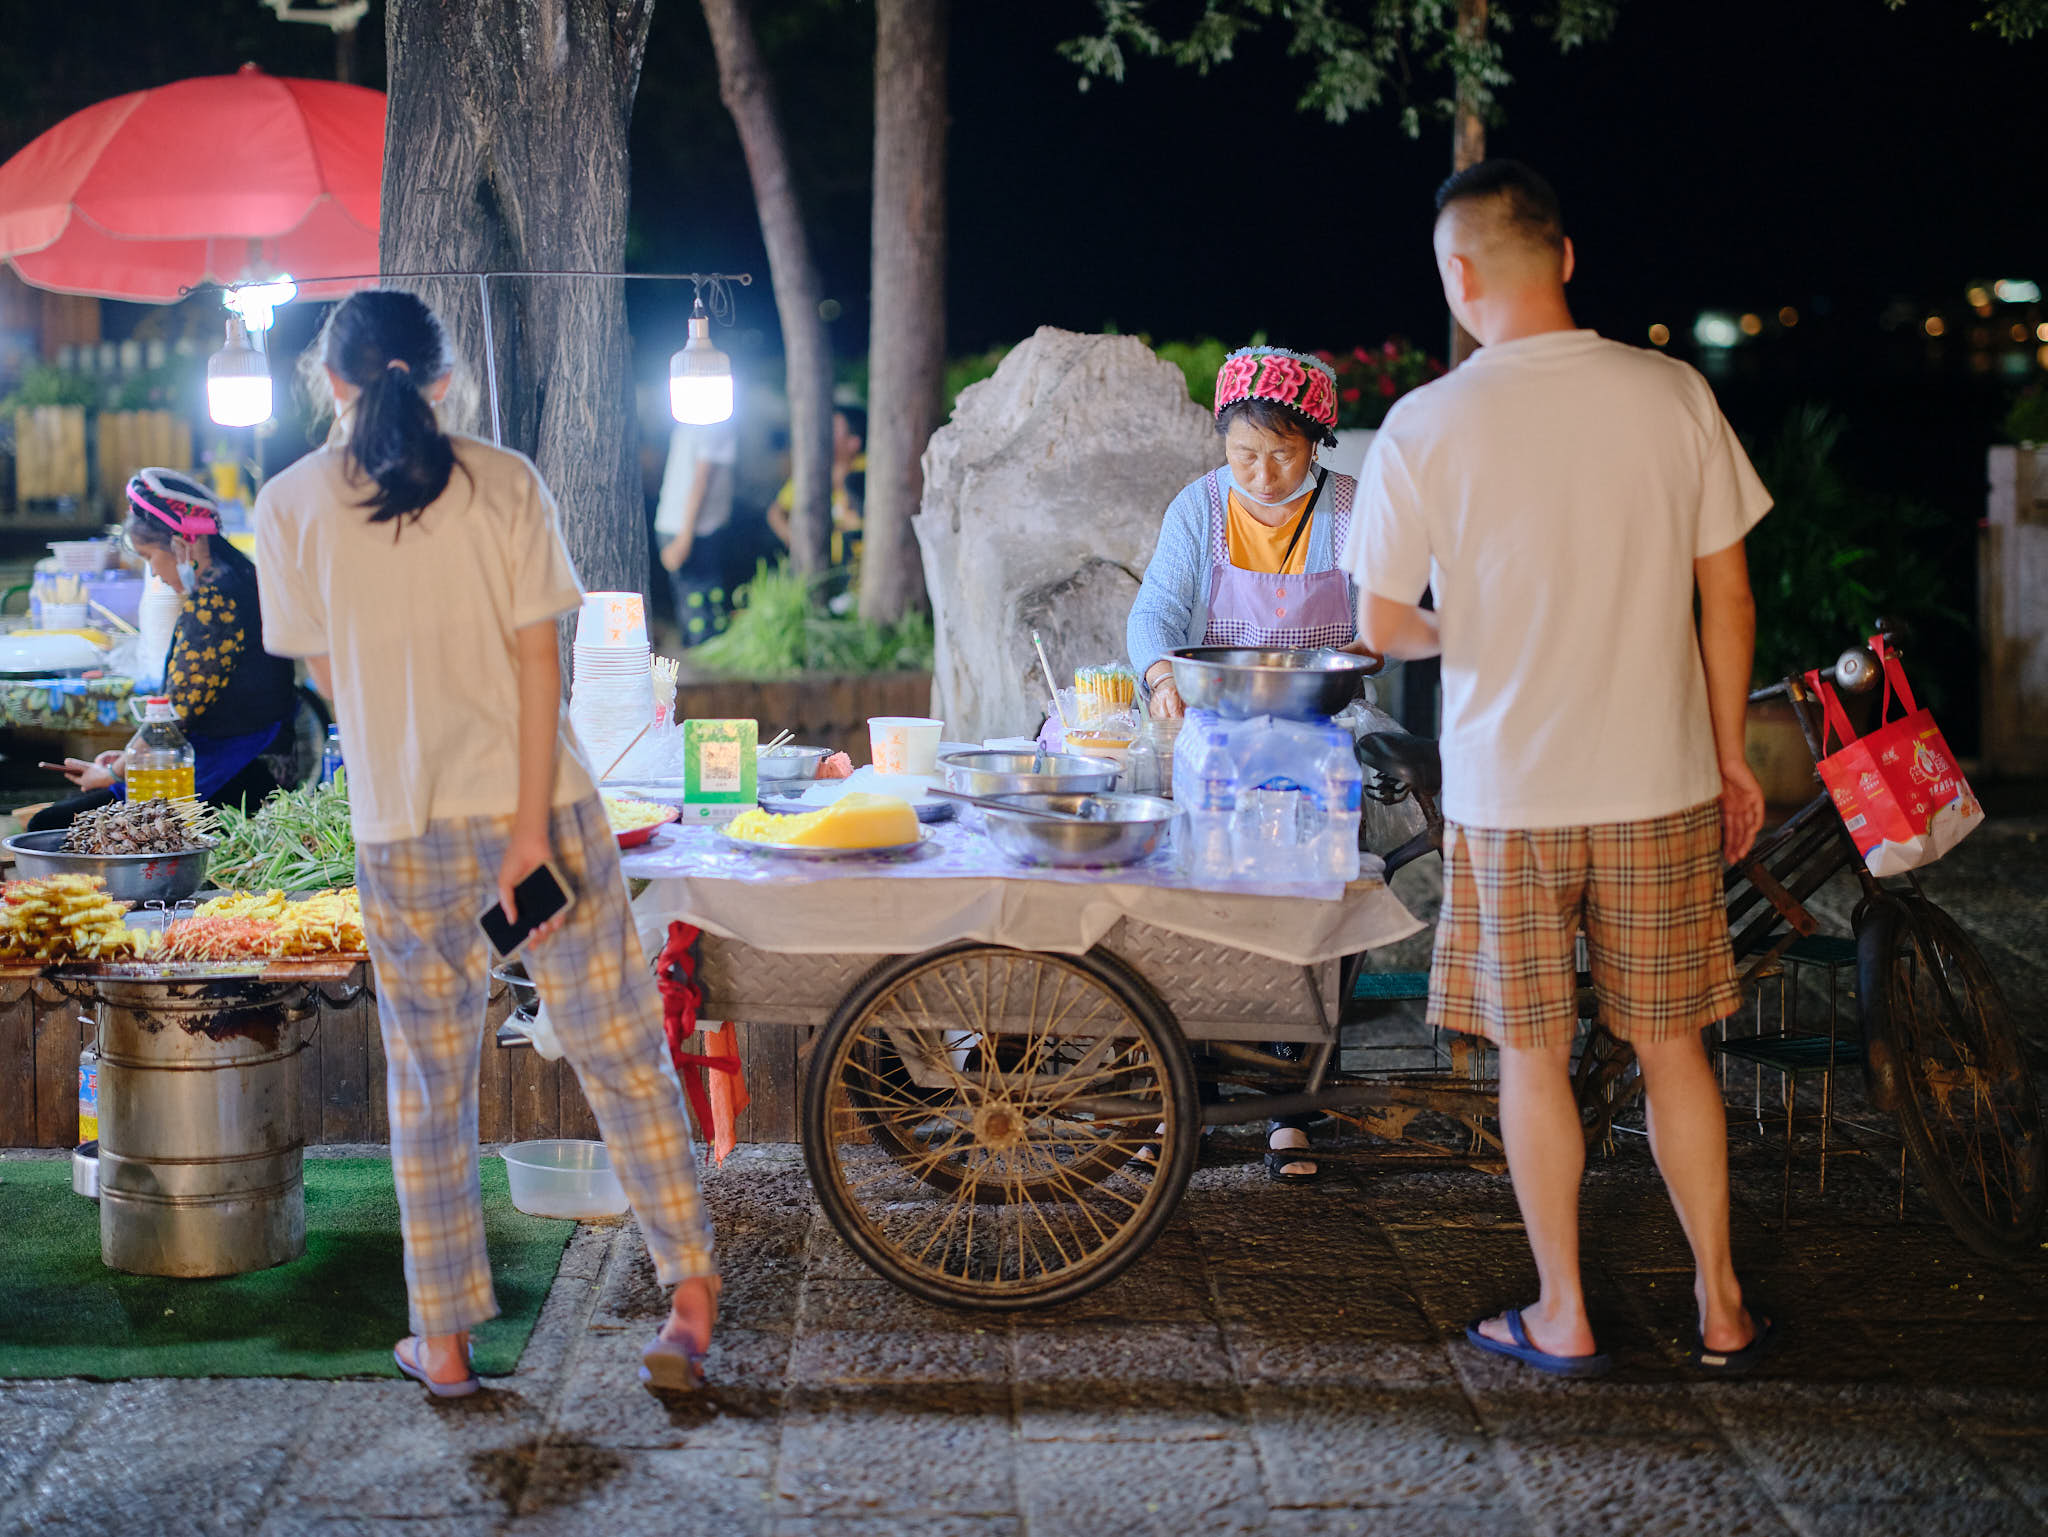 Vendors selling products on the streets of Shuanglang Ancient Town